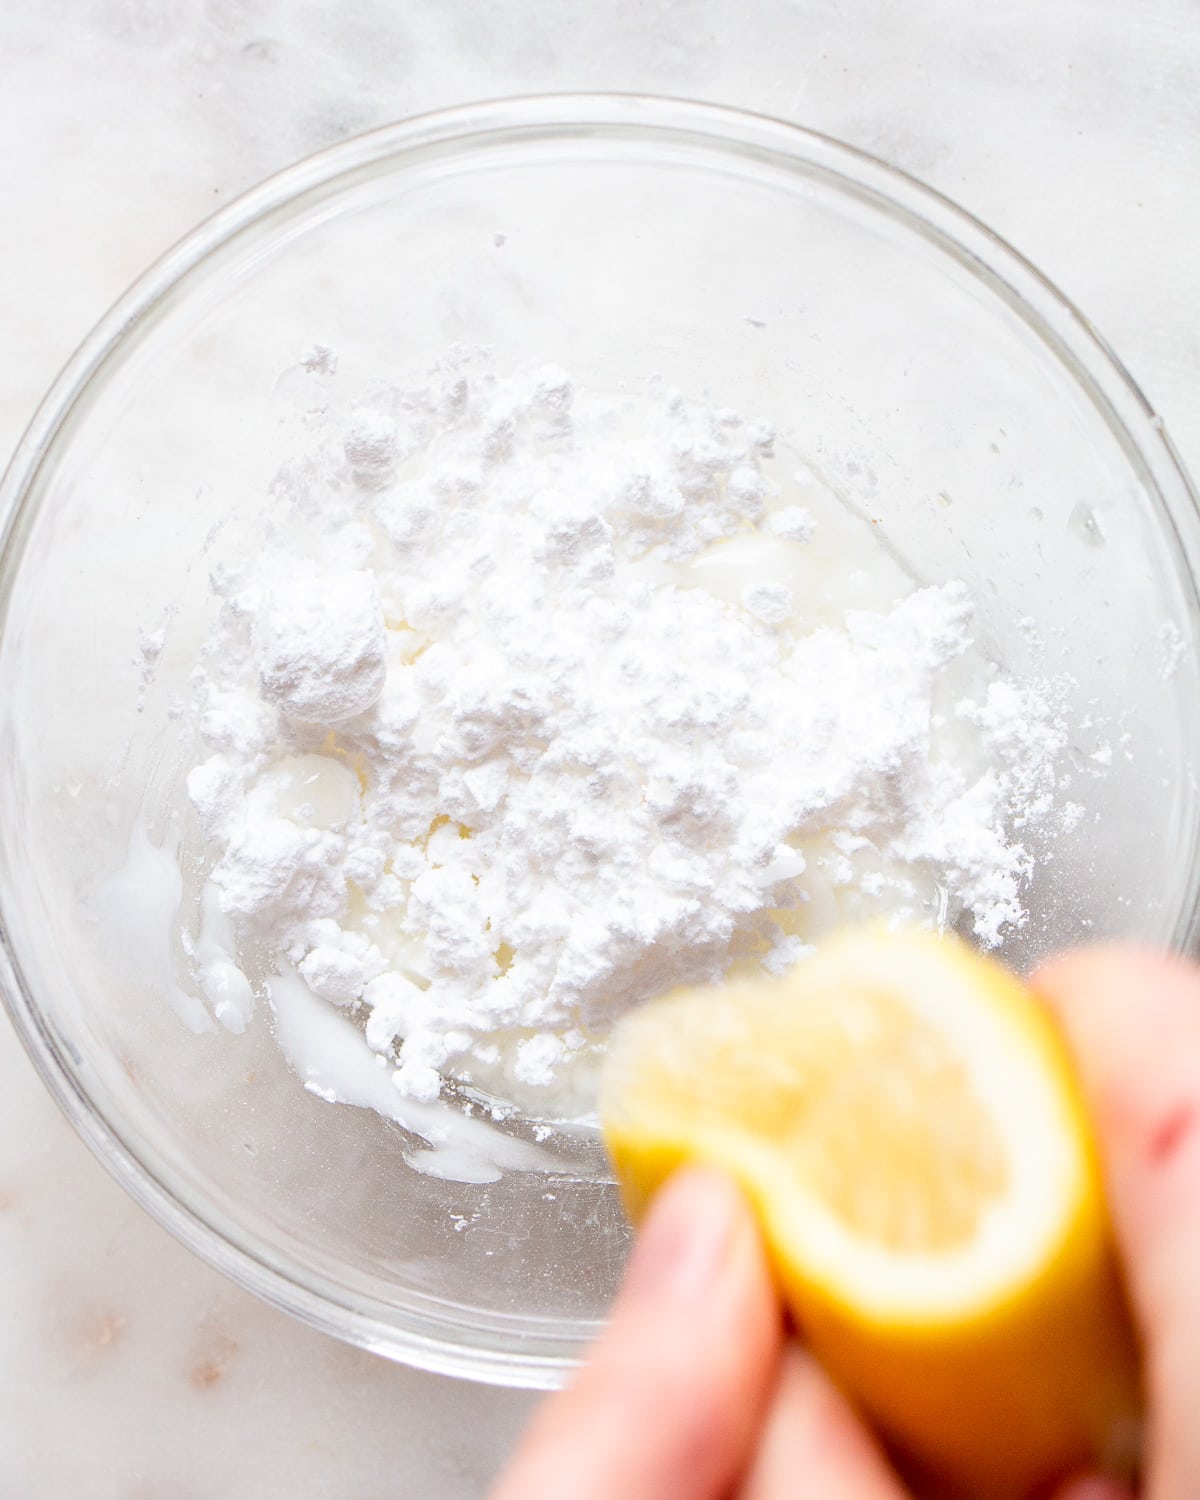 Hand squeezing lemon juice into a small bowl with icing sugar.